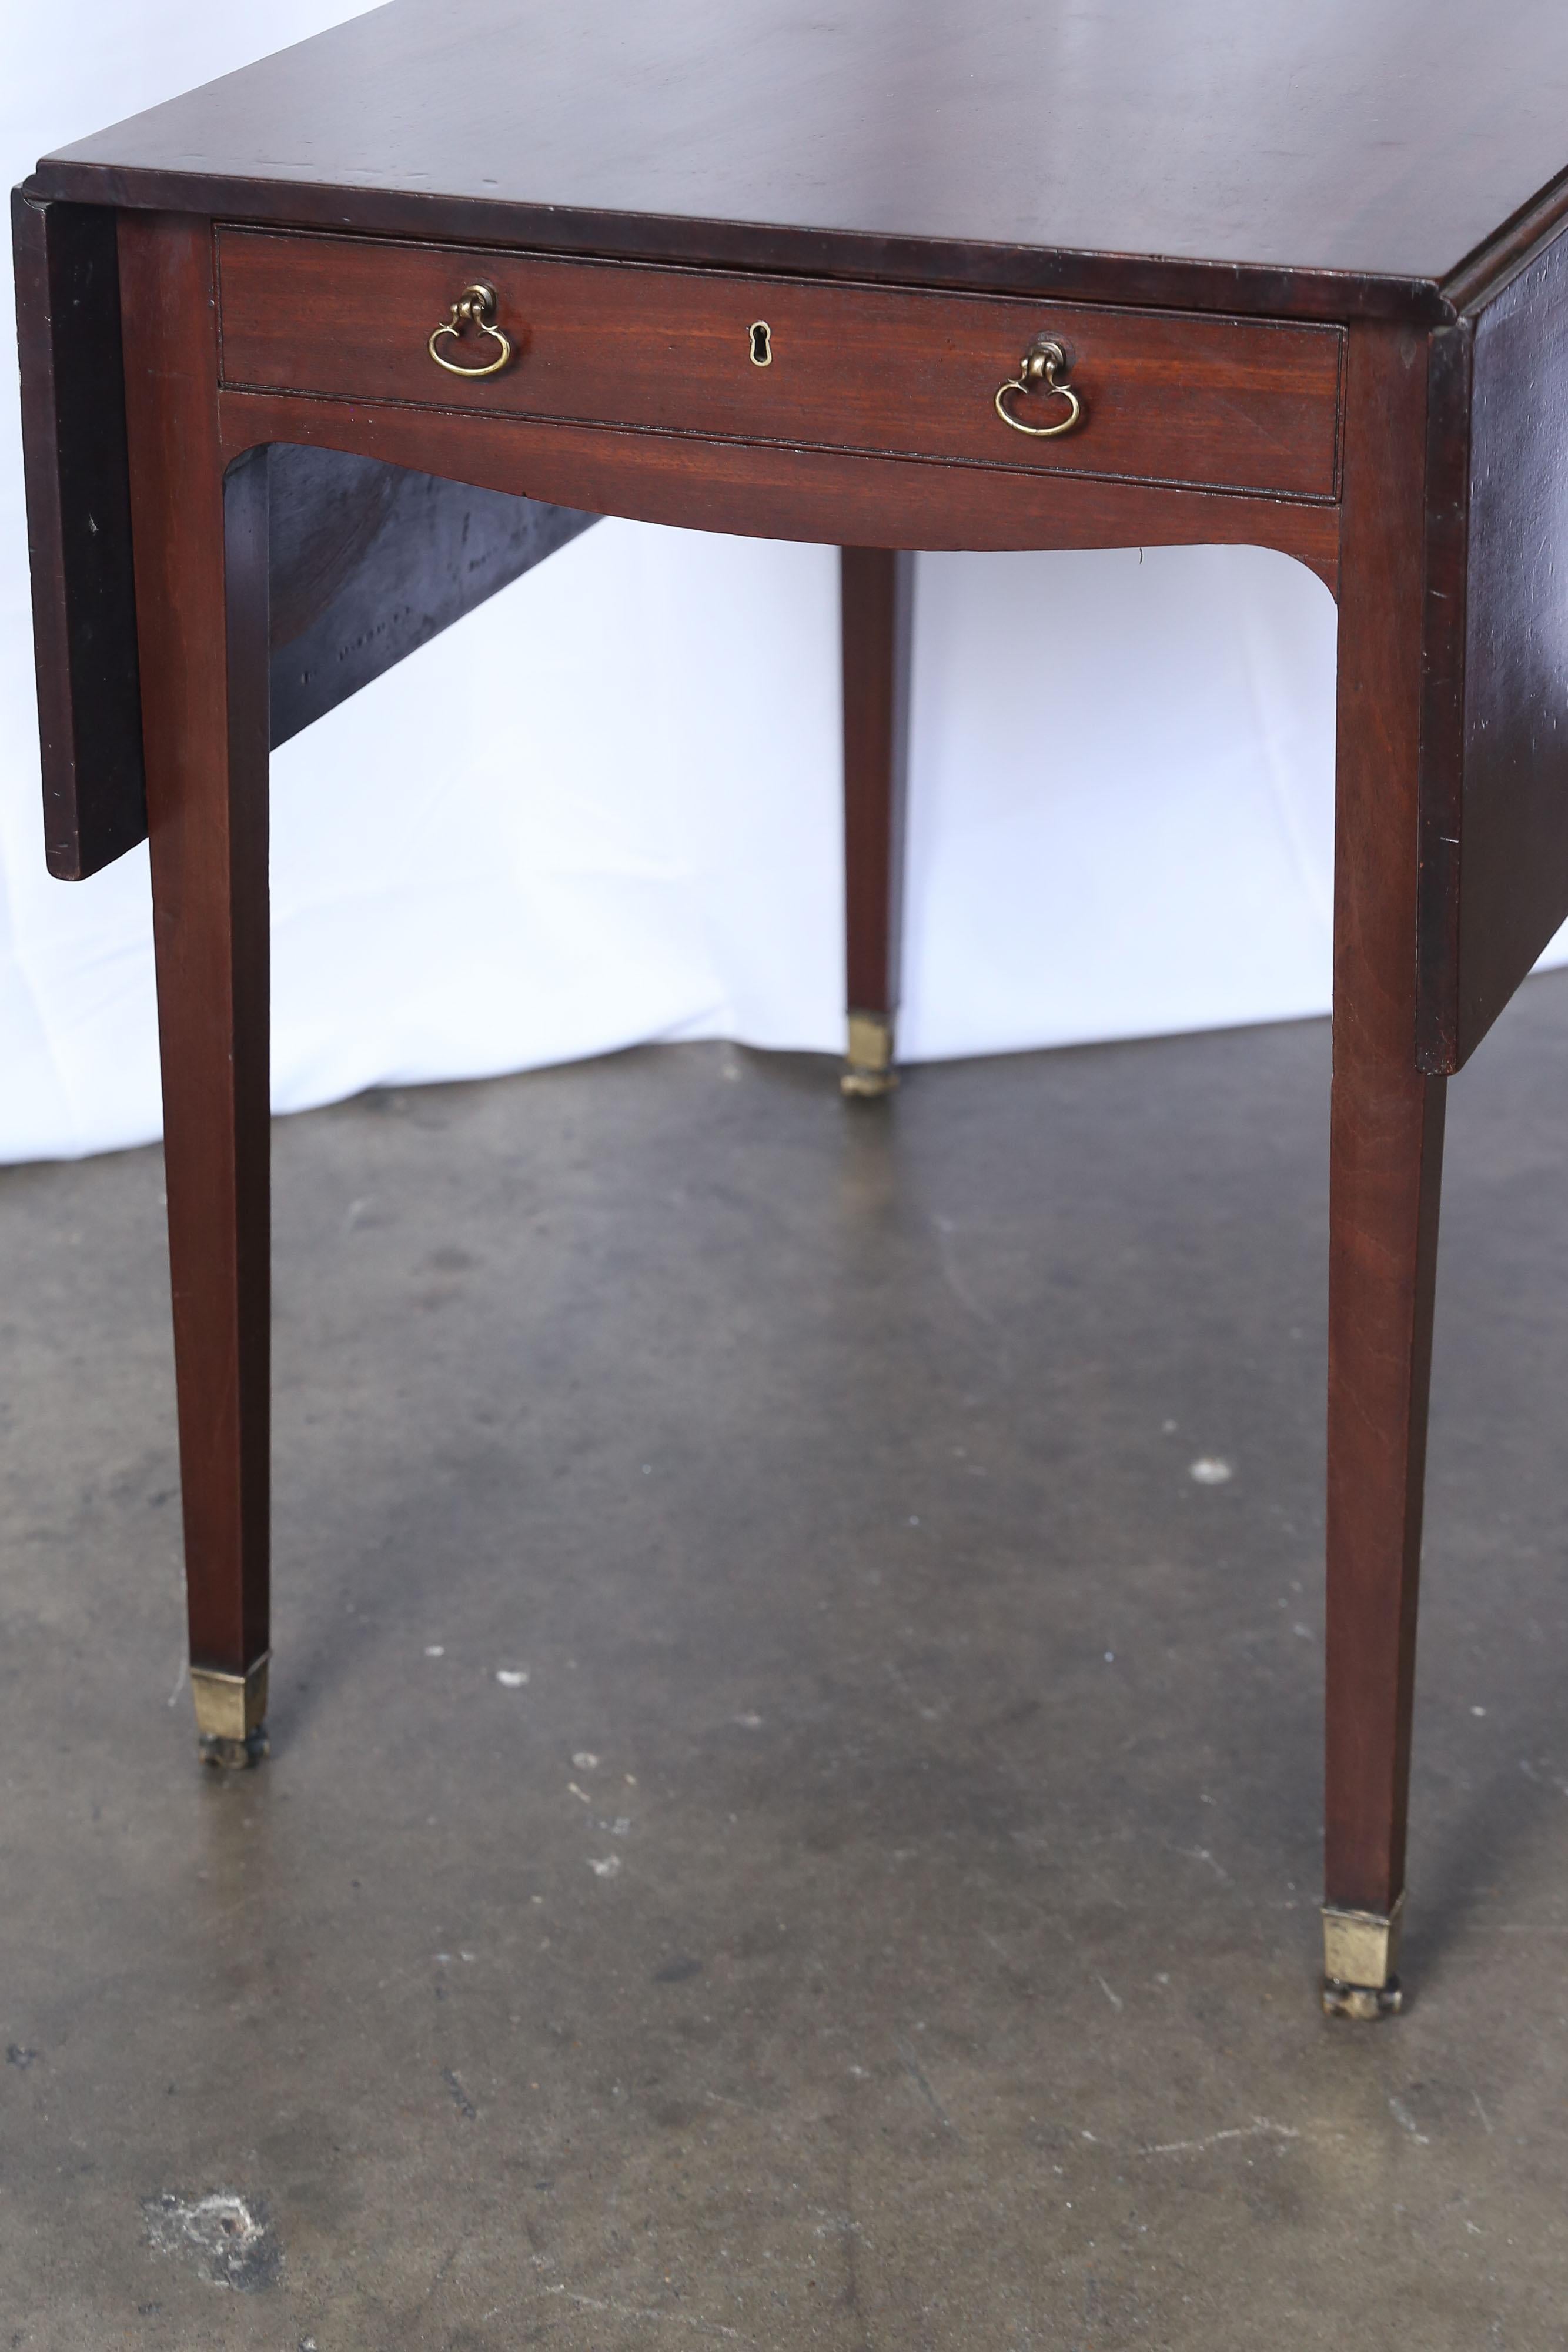 Early 19th century mahogany Pembroke Table in the Georgian style. All four legs have brass caps and are on wheels. When opened the table-top is 42.25